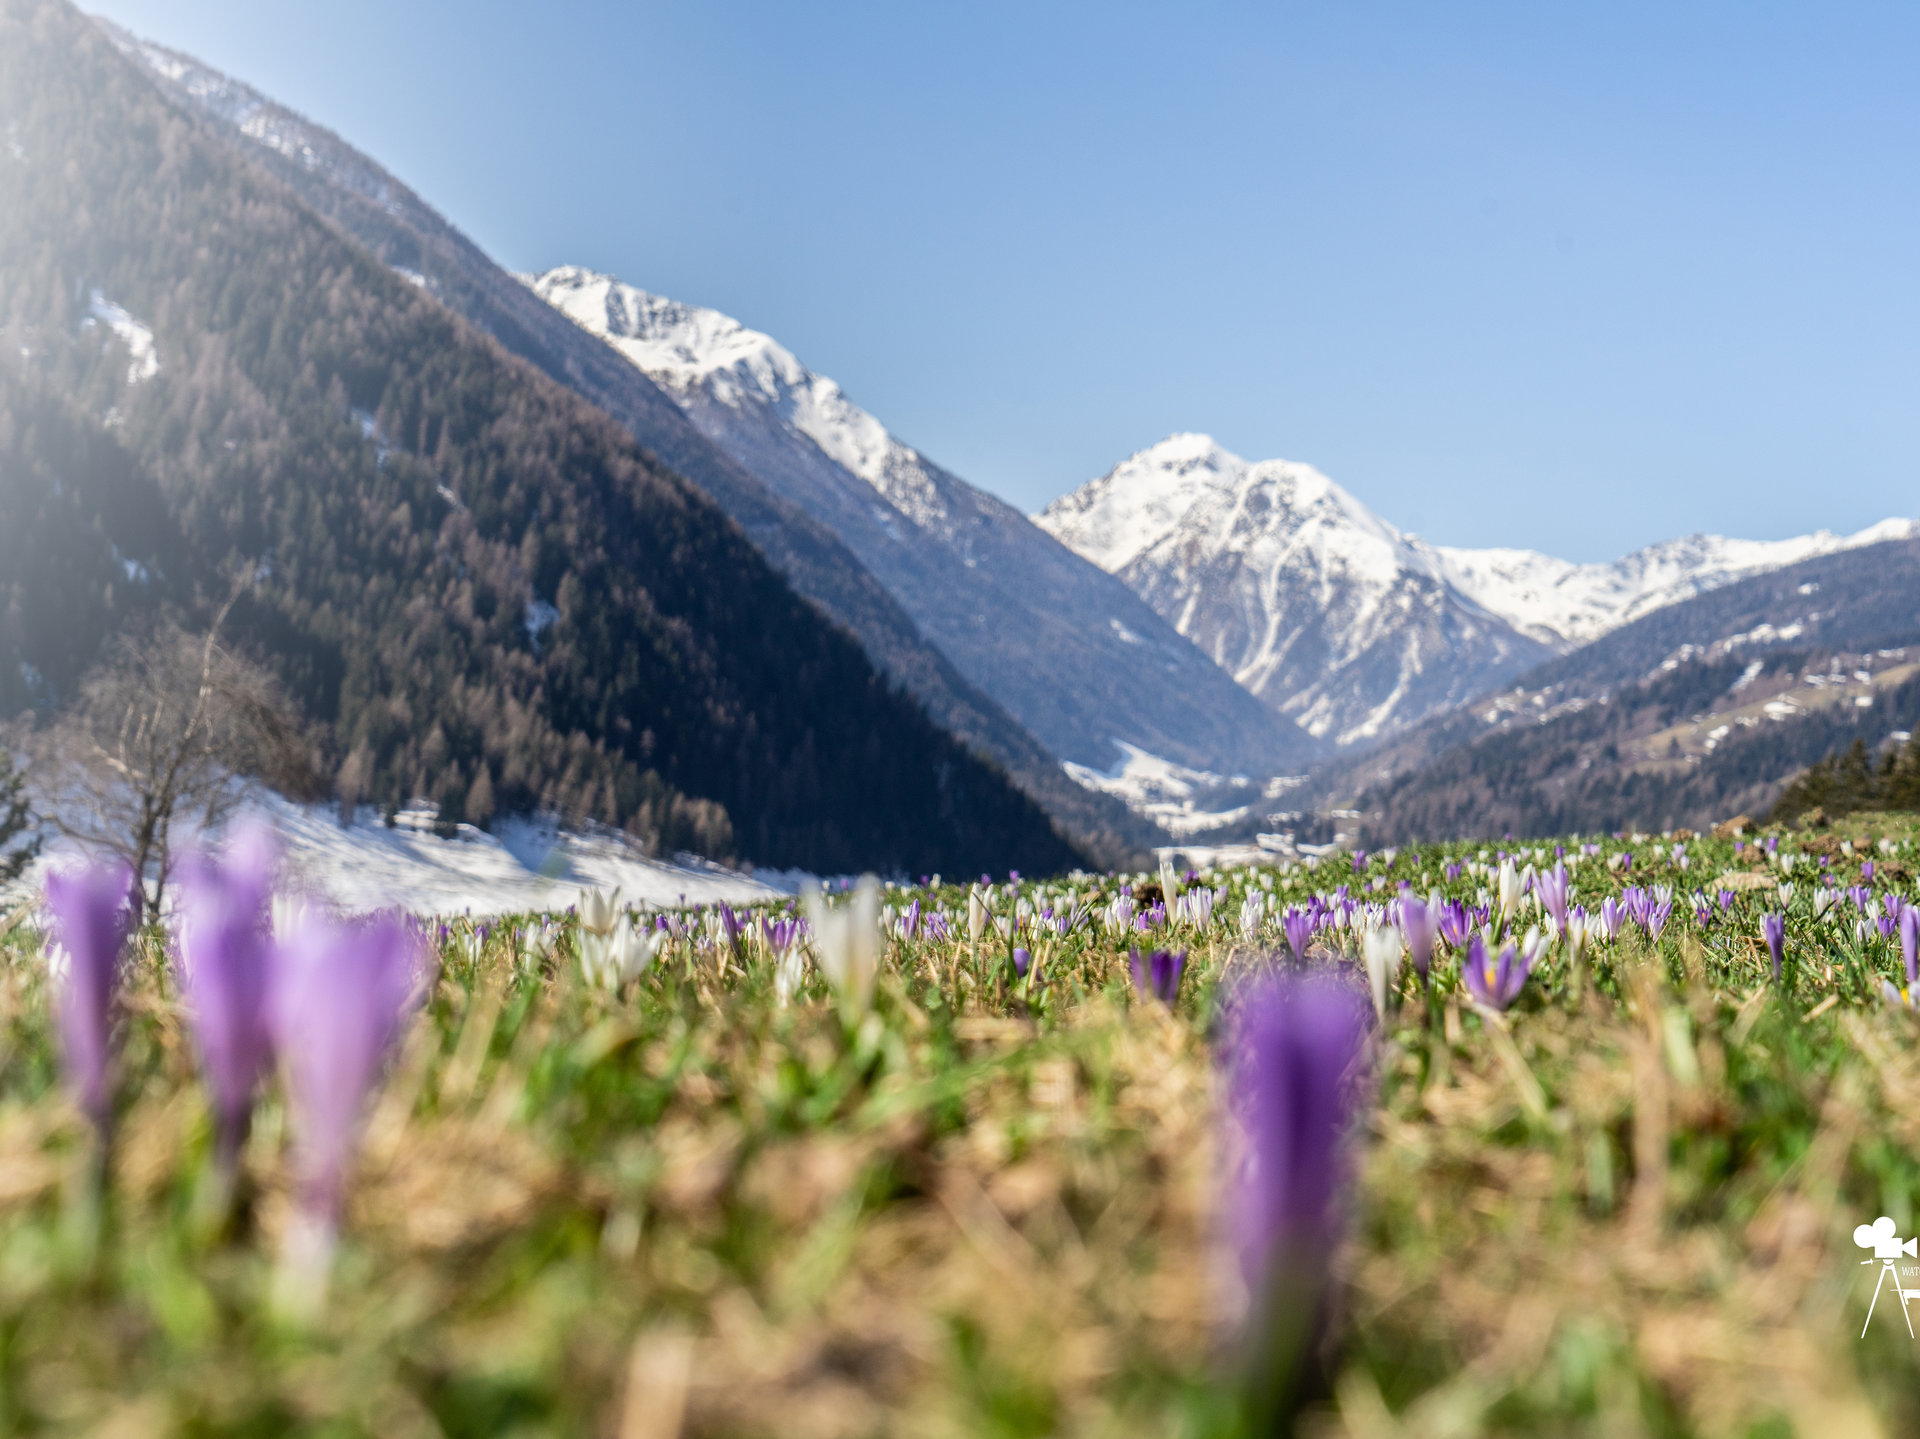 In Ultental Valley you can admire the spring down in the valley an the winter on the mountains.